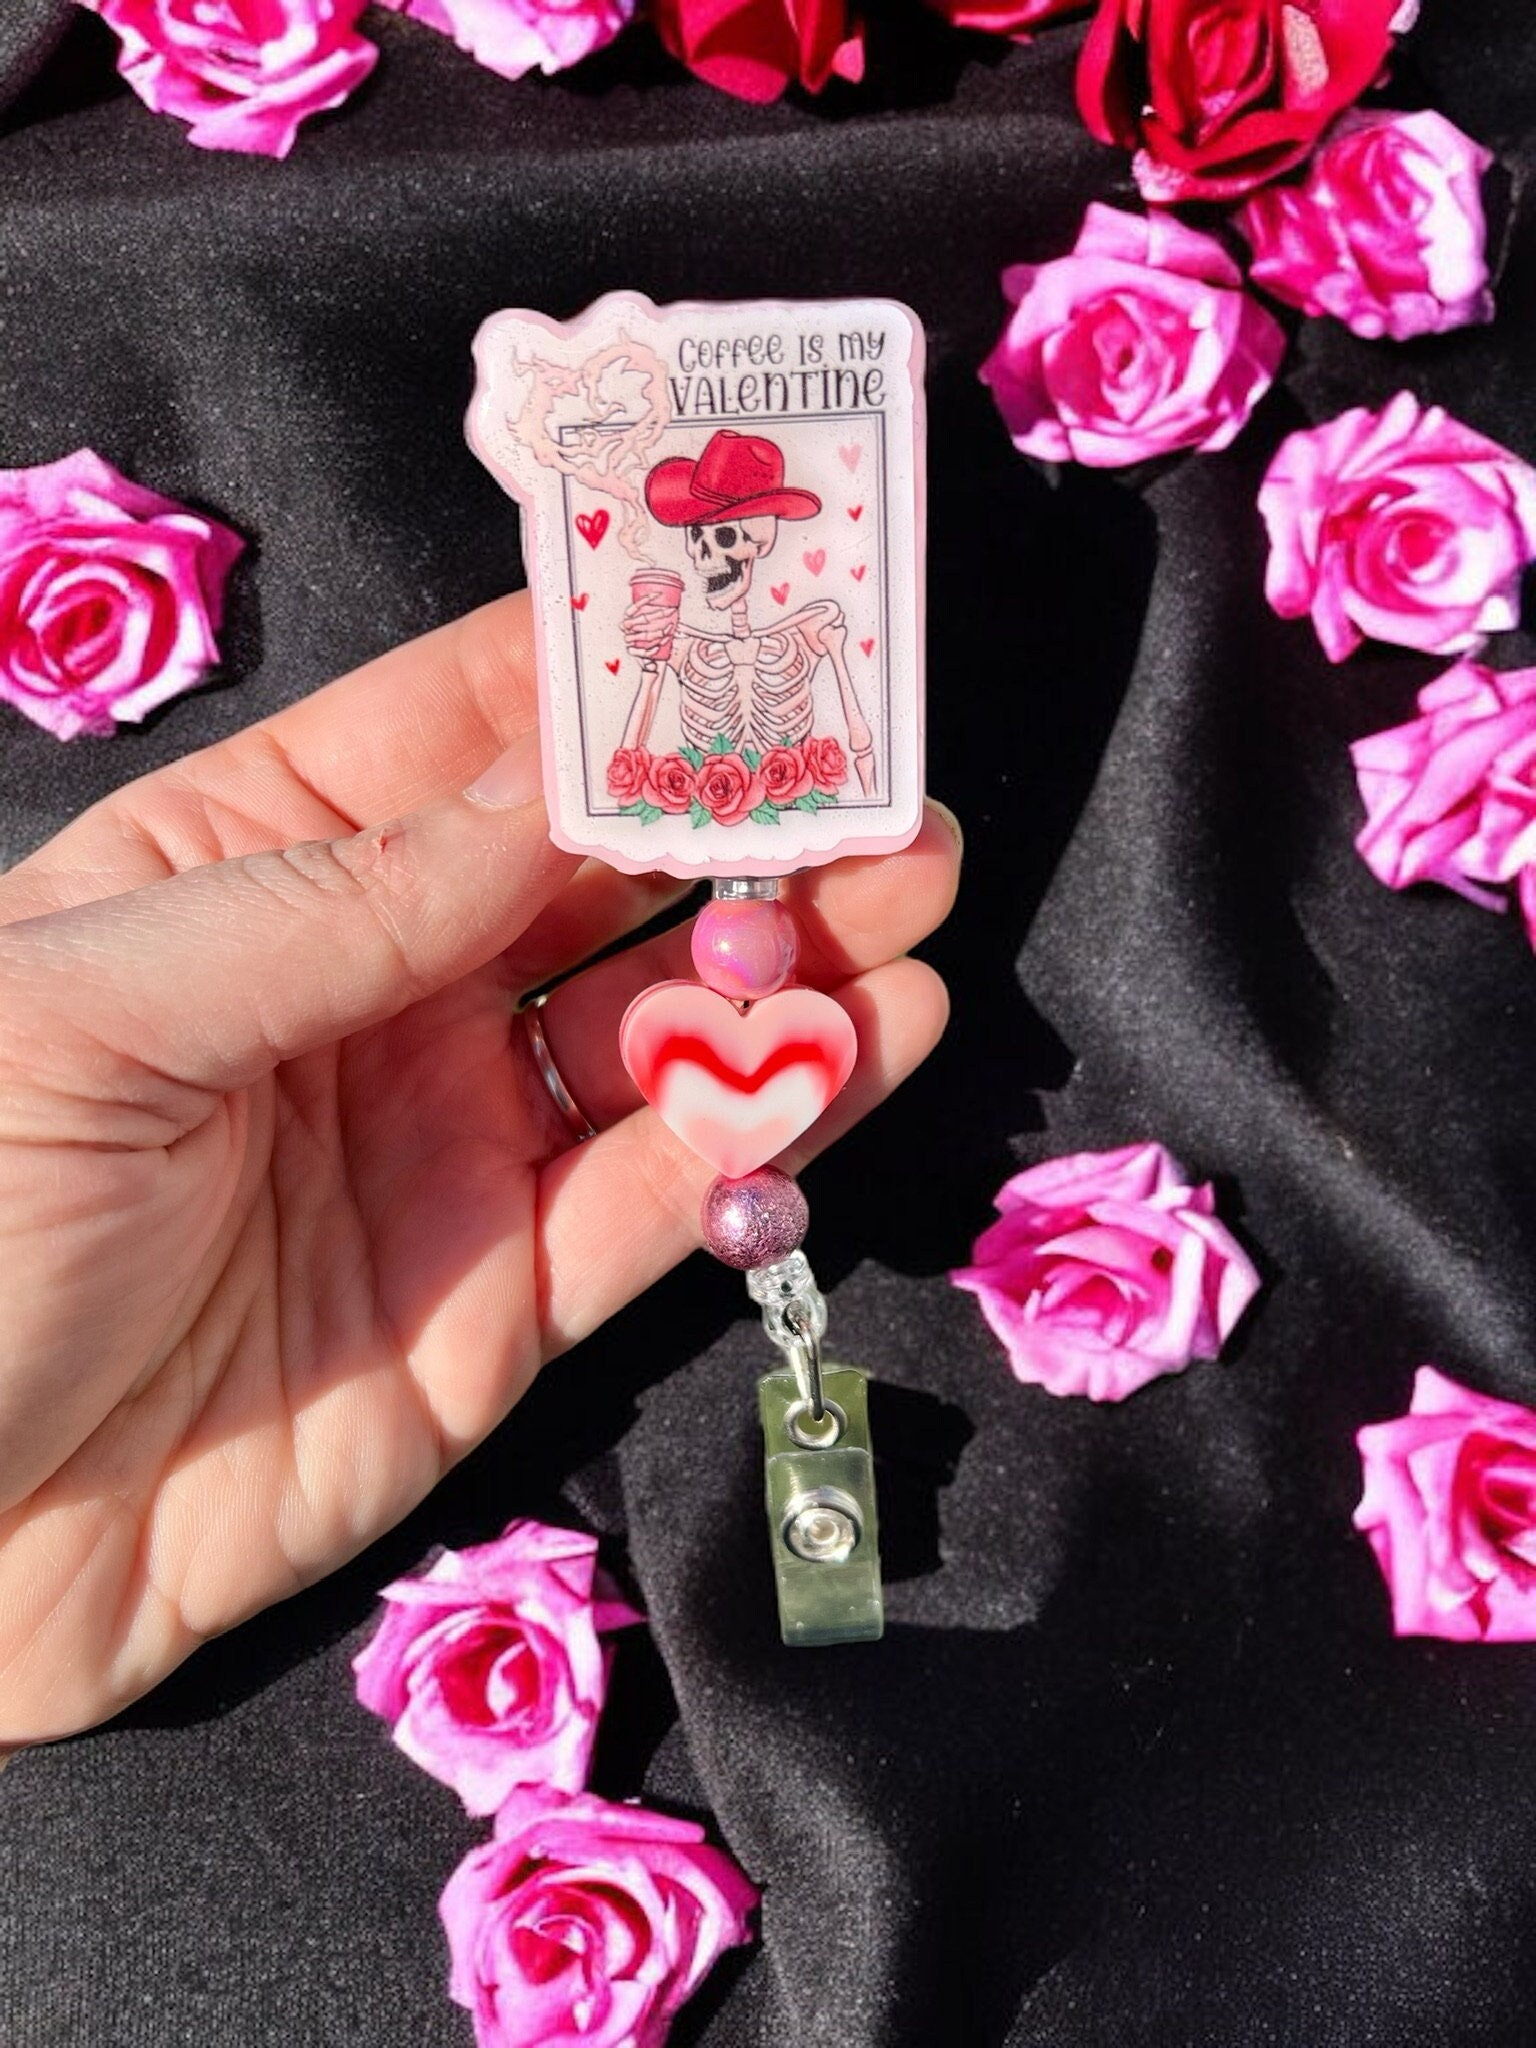 Mouse, Valentine’s Day , Minnie, love, bow , ID holder, nurse badge holder,  Valentine’s Day badge reel